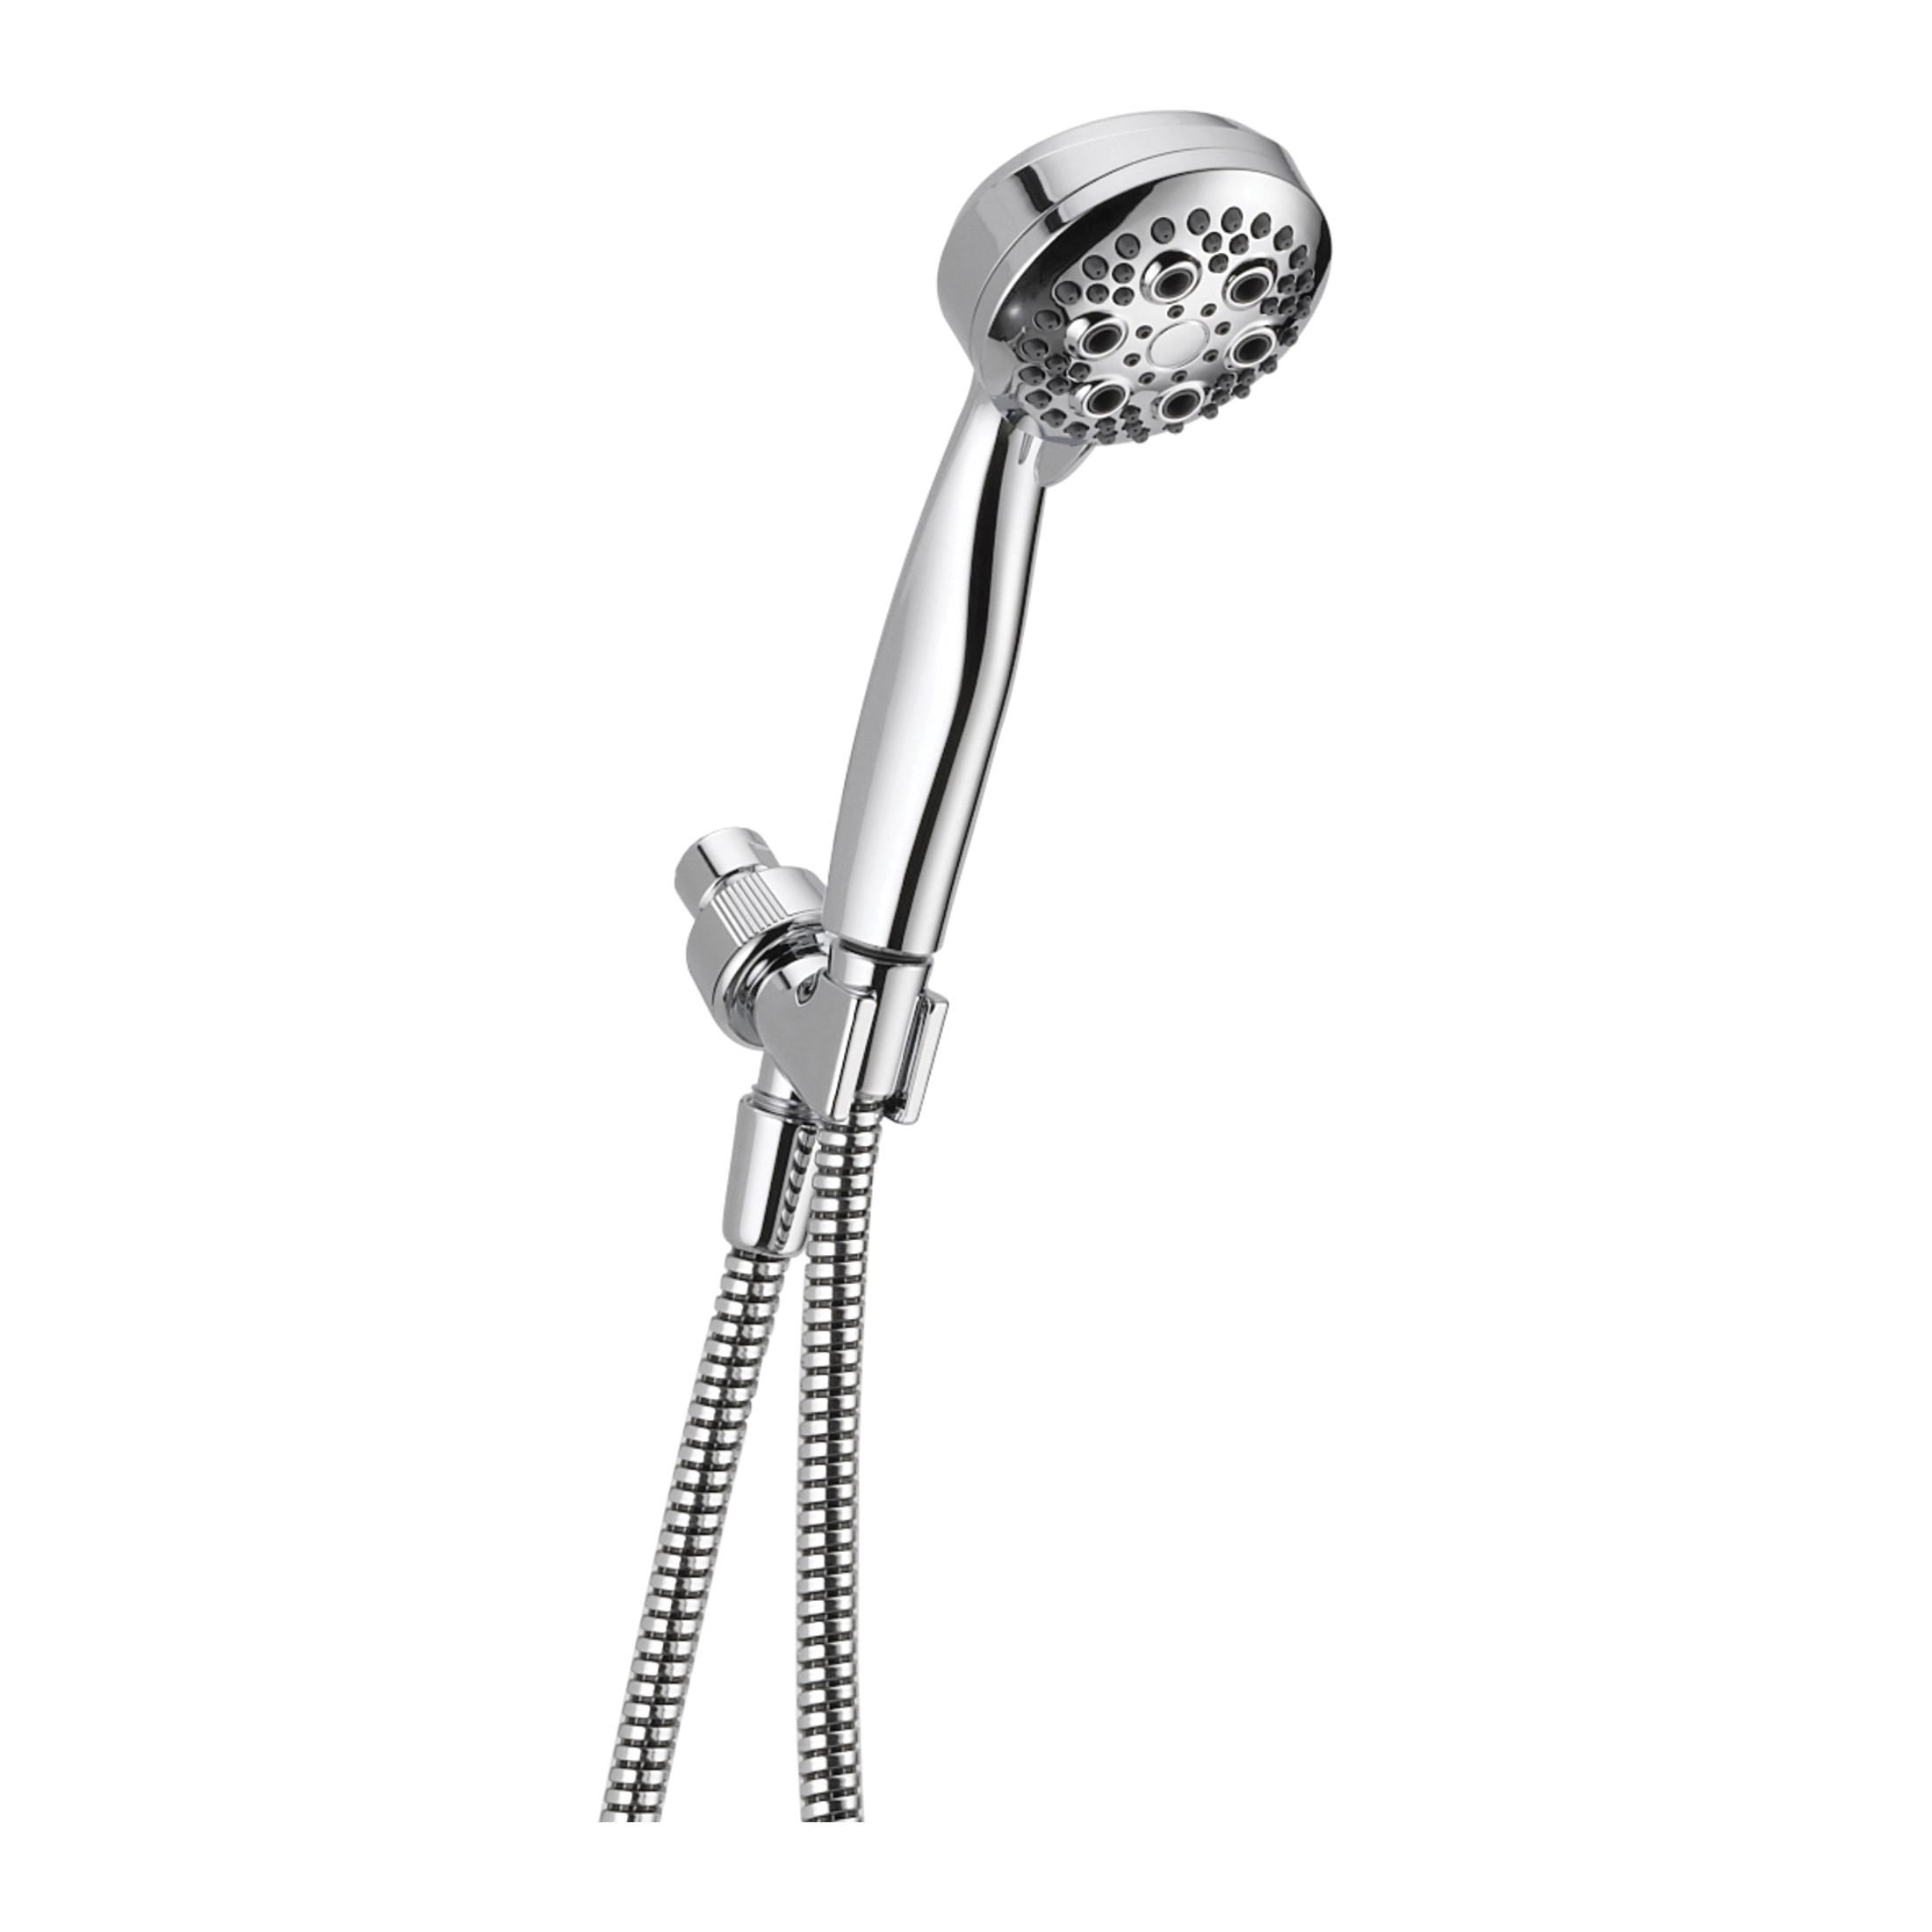 DELTA® 54434-18-PK Premium Hand Shower, 1.75 gpm, 60 to 82 in L Hose, Polished Chrome, Import